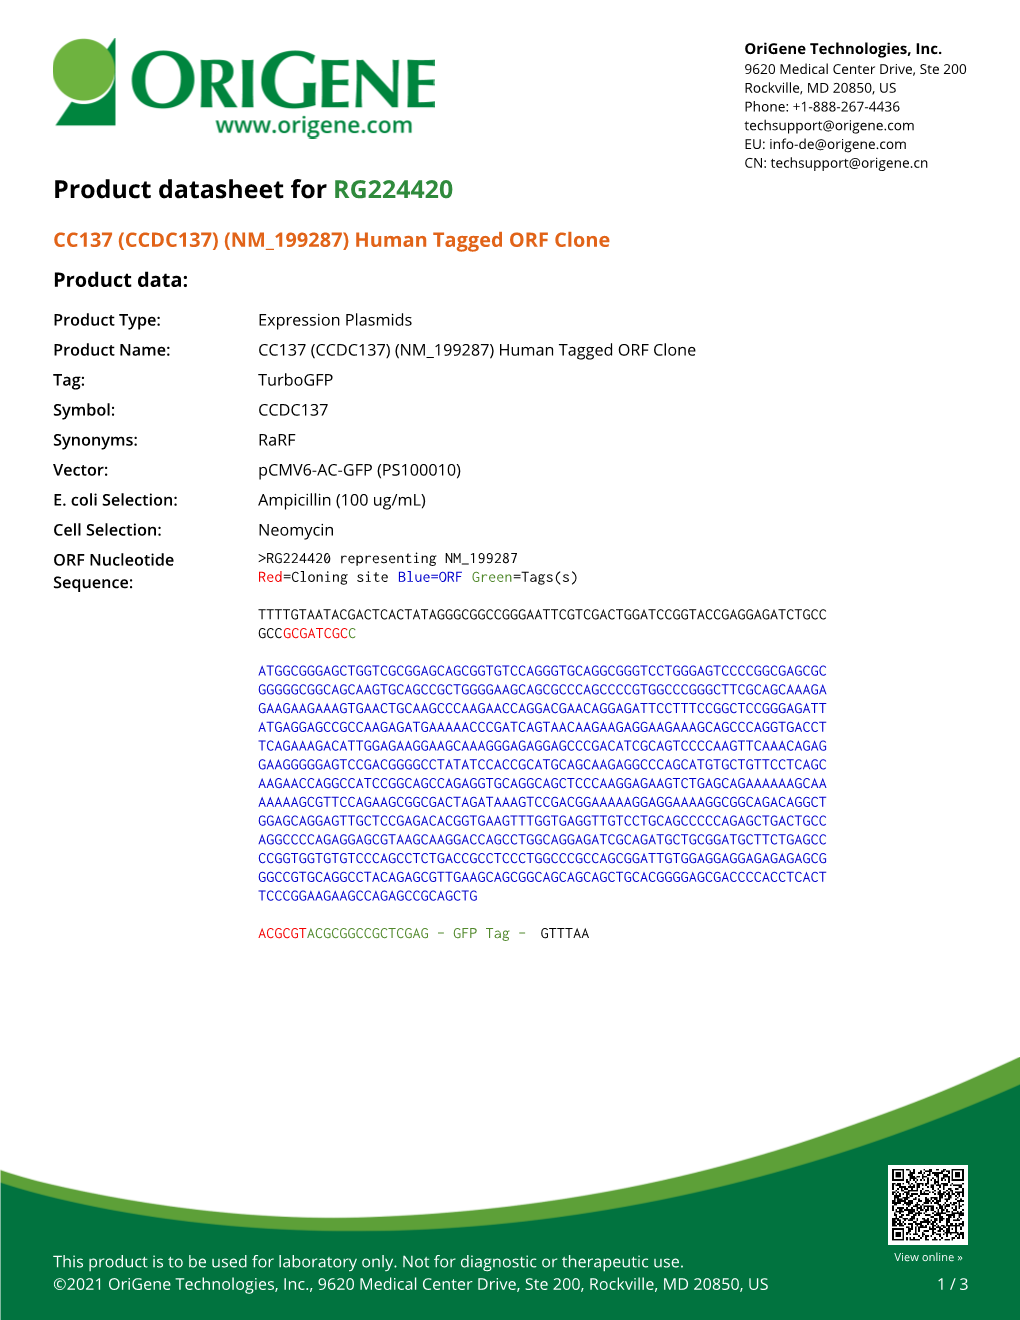 CC137 (CCDC137) (NM 199287) Human Tagged ORF Clone Product Data